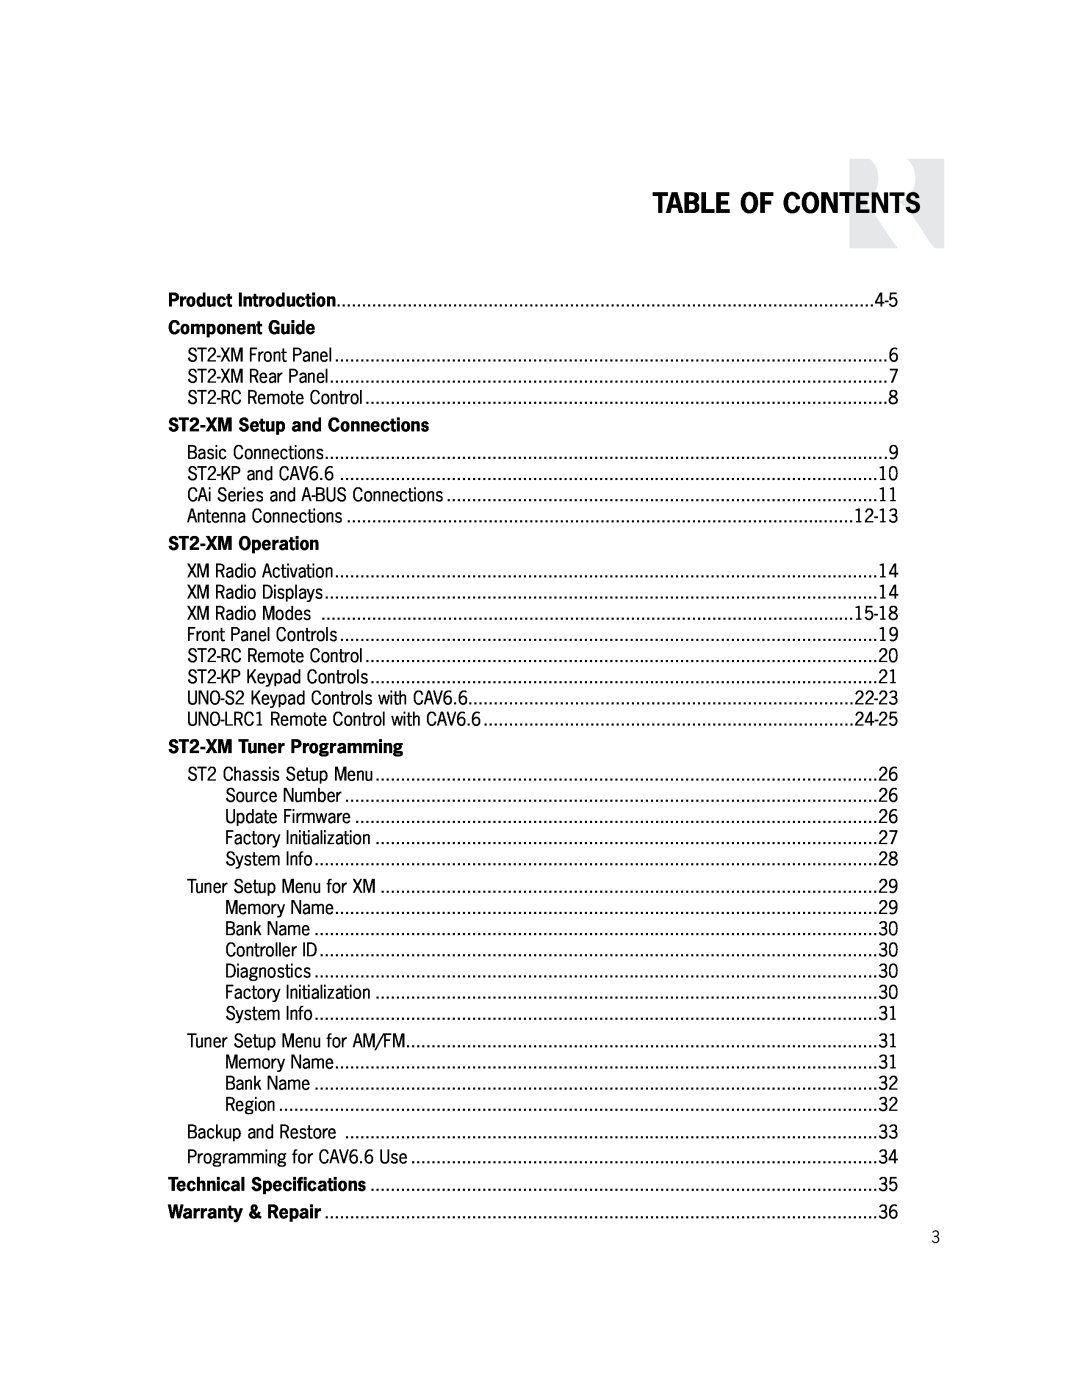 Russound Table Of Contents, Component Guide, ST2-XMSetup and Connections, ST2-XMOperation, ST2-XMTuner Programming 